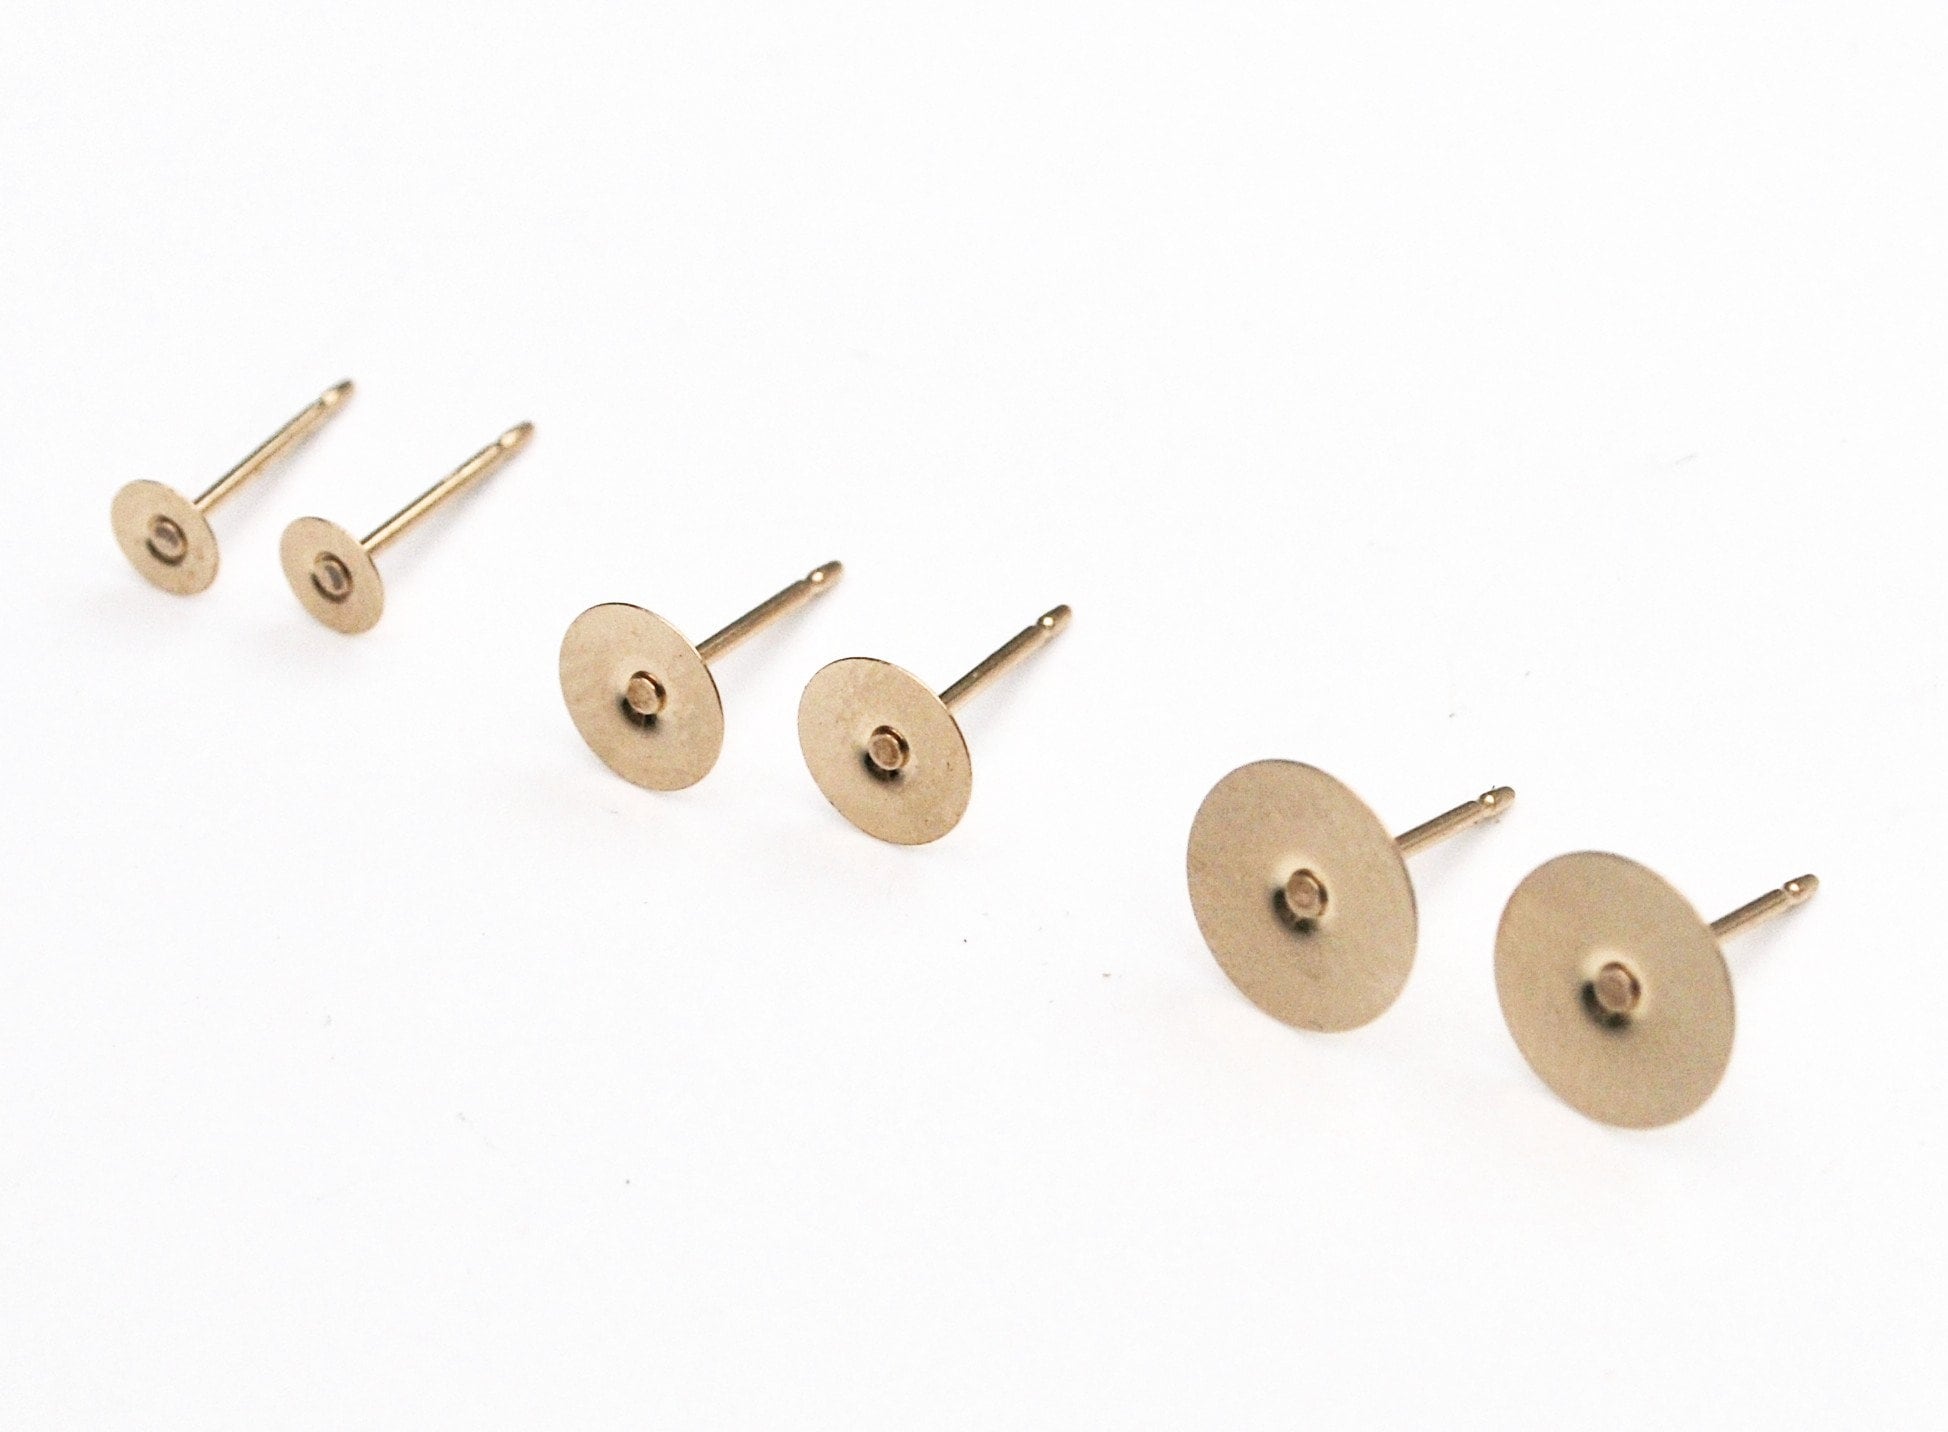 Earring Posts Stainless Steel, 1200pcs Hypoallergenic Earring Posts and Backs, Gold Flat Pad Earring Studs with Clutch for Earring Making and DIY Stud